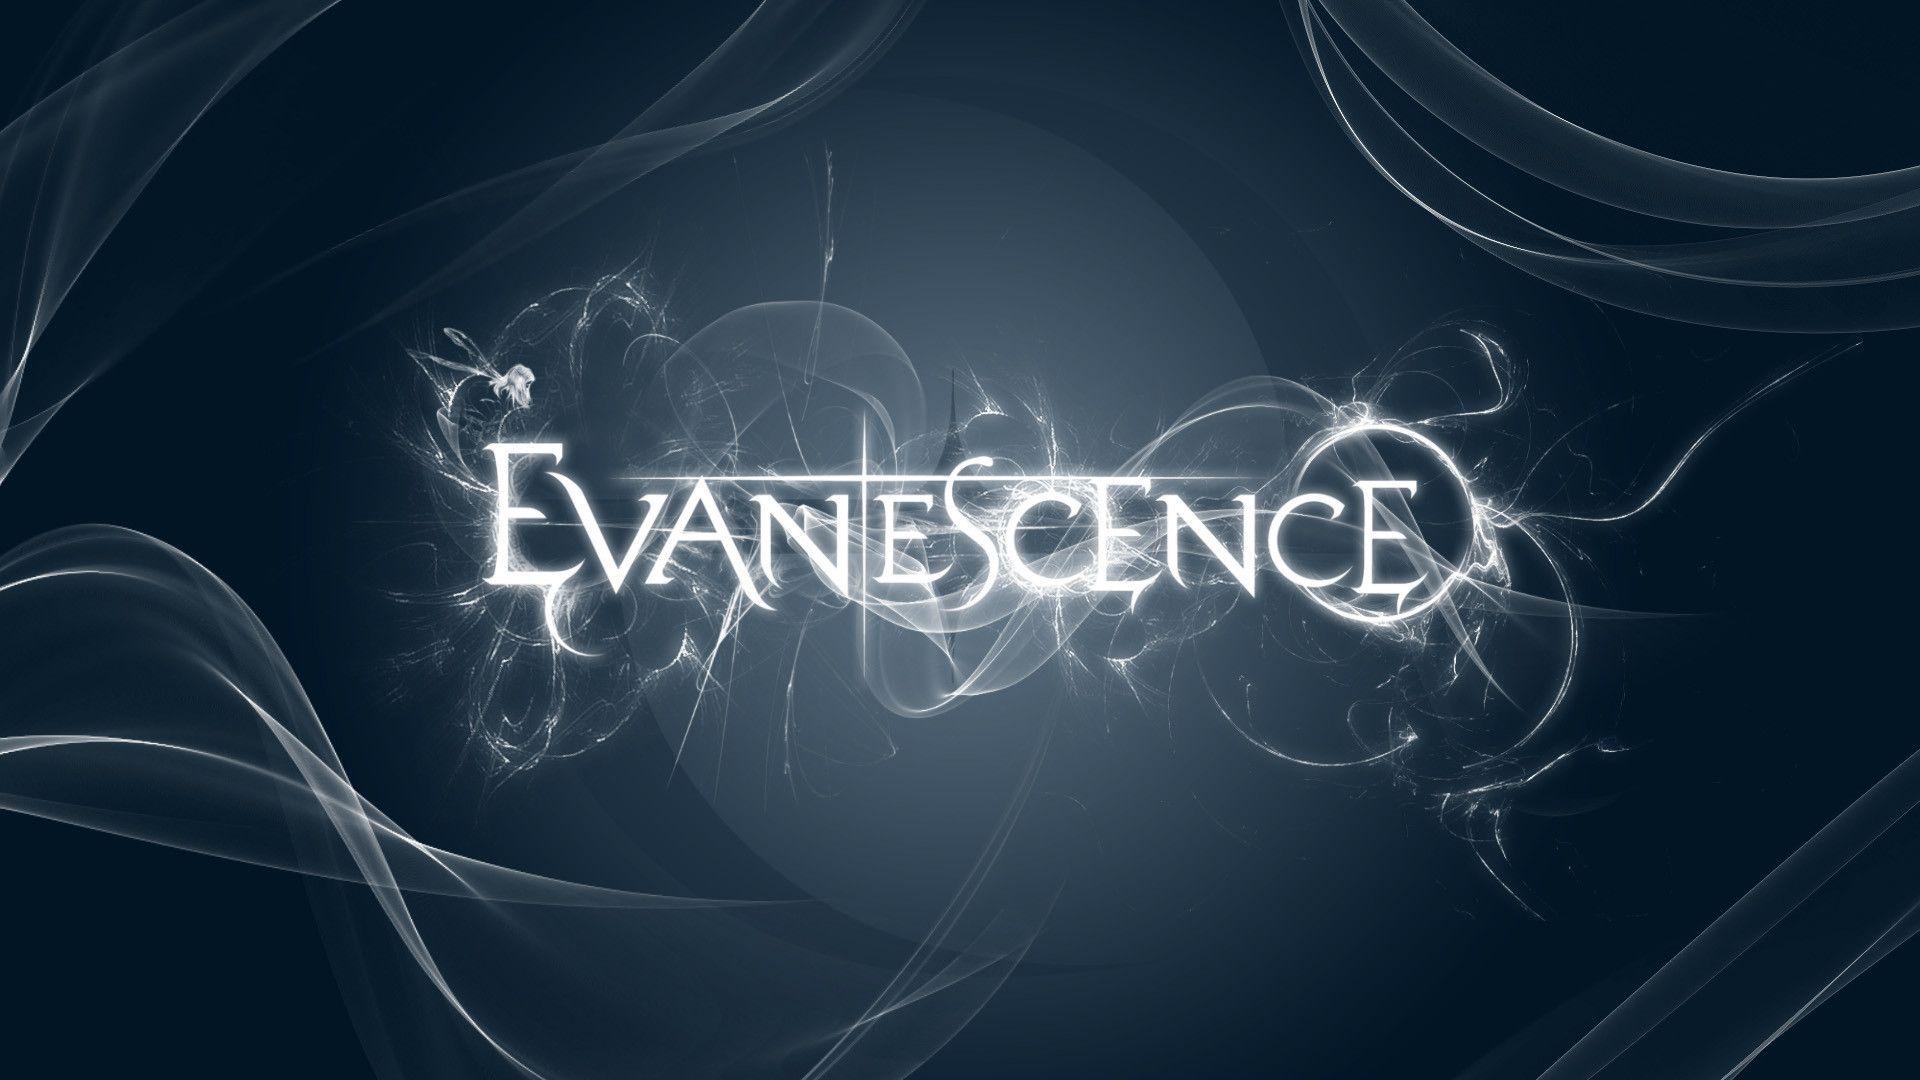 Evanescence Wallpapers 61 images